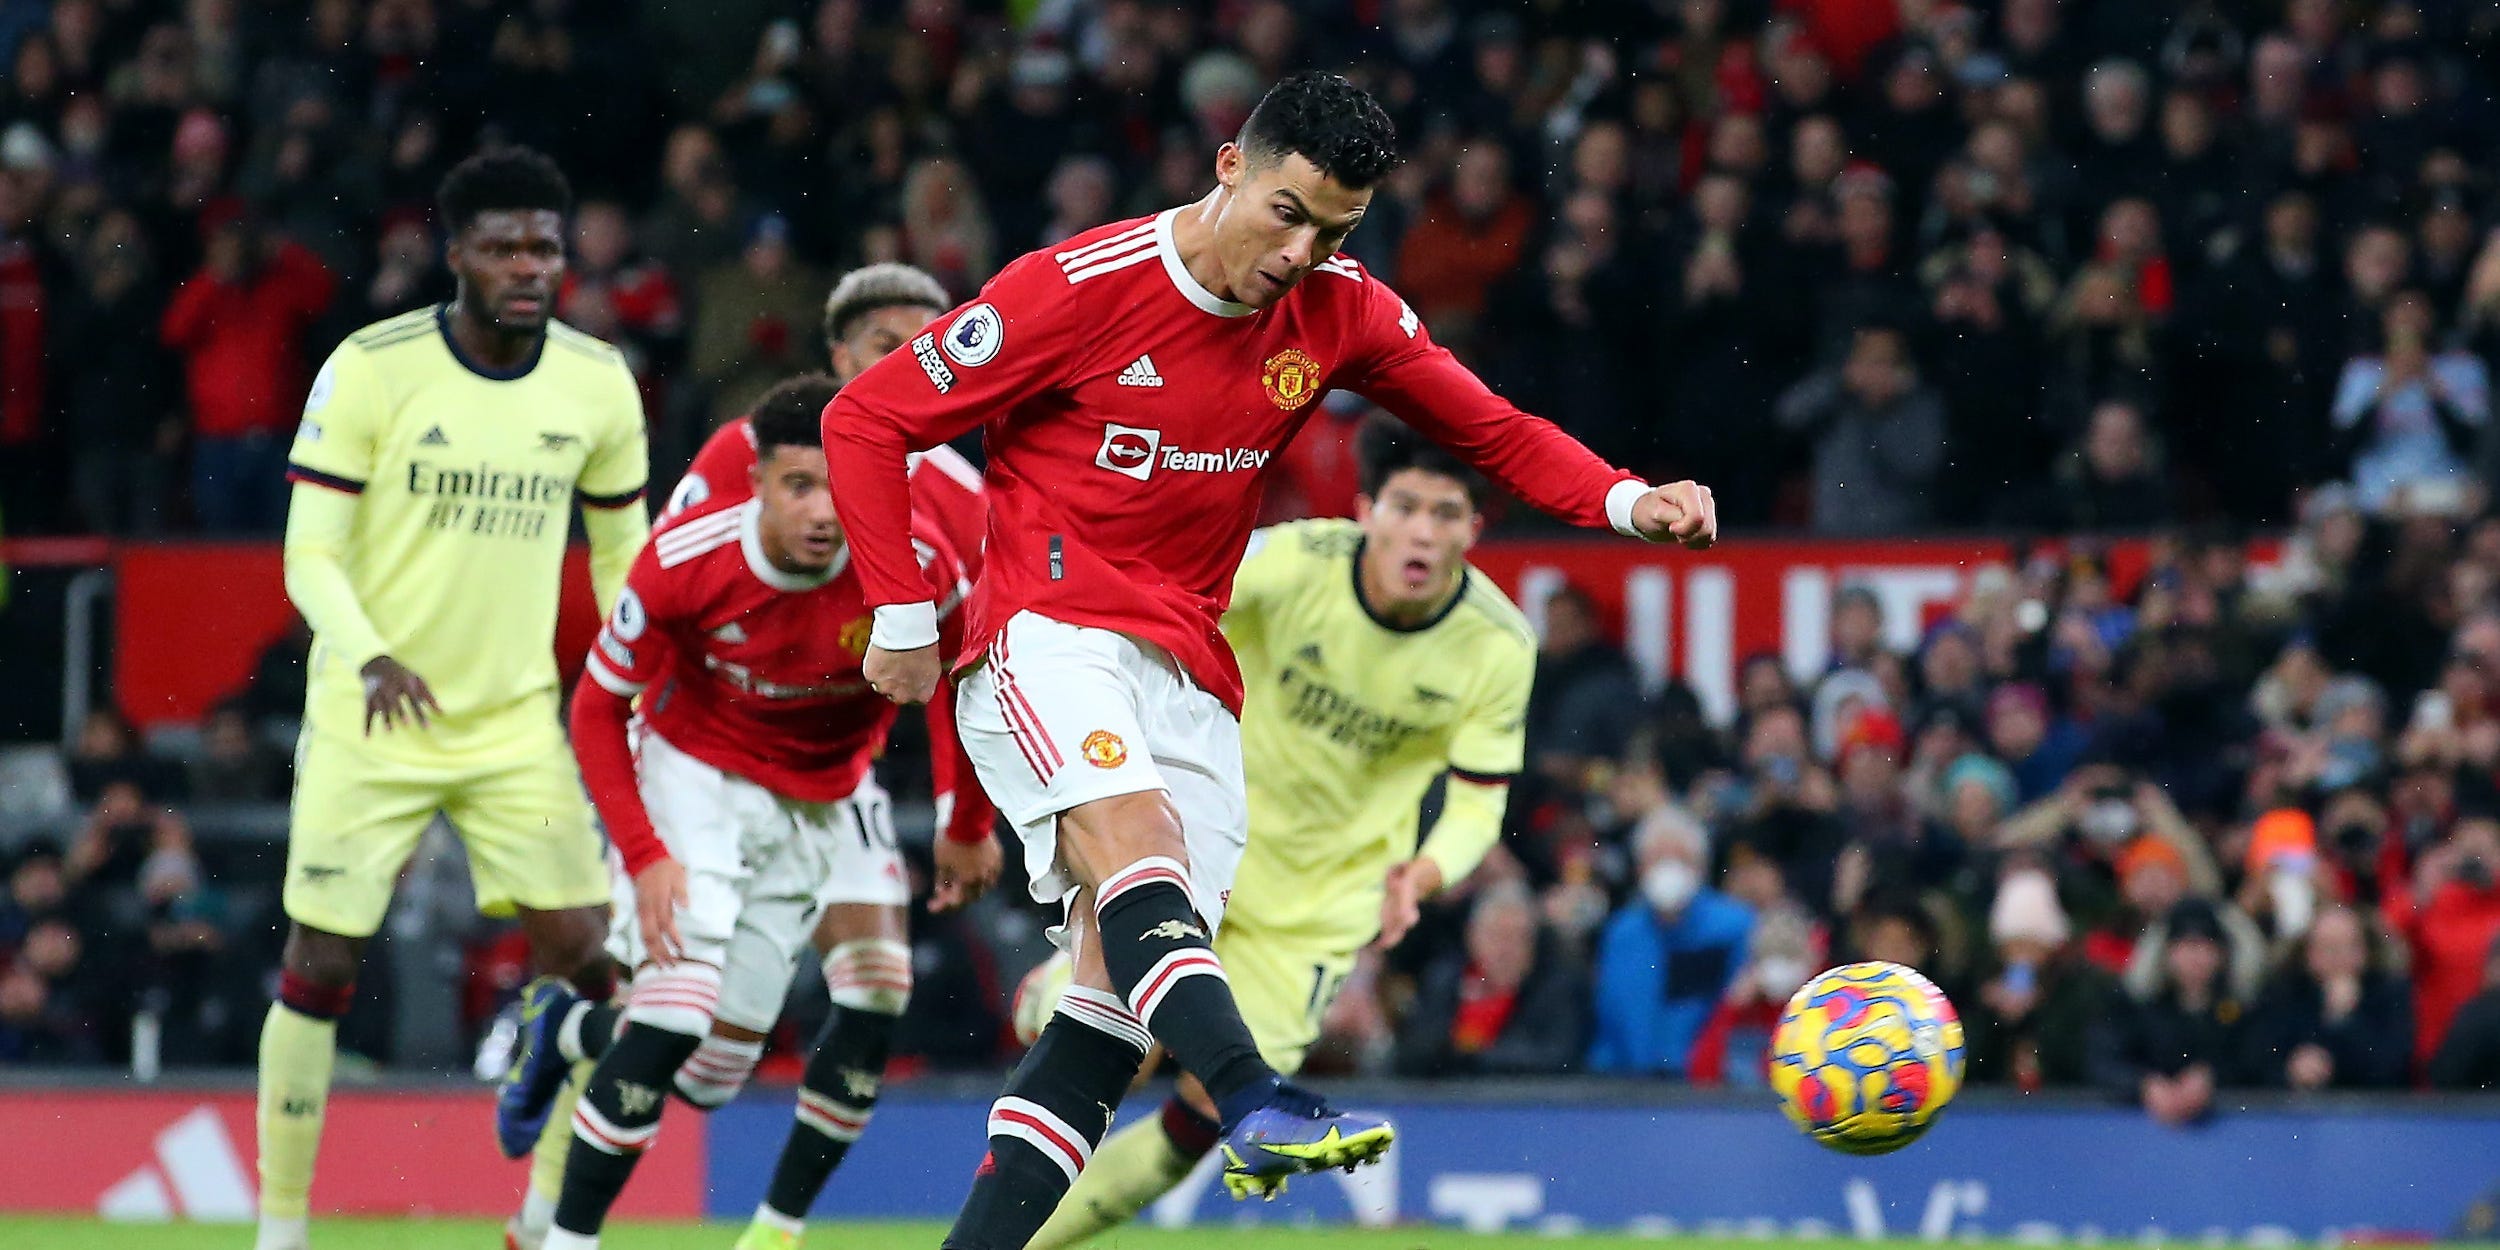 Cristiano Ronaldo scores a penalty for Manchester United against Arsenal on December 2, 2021